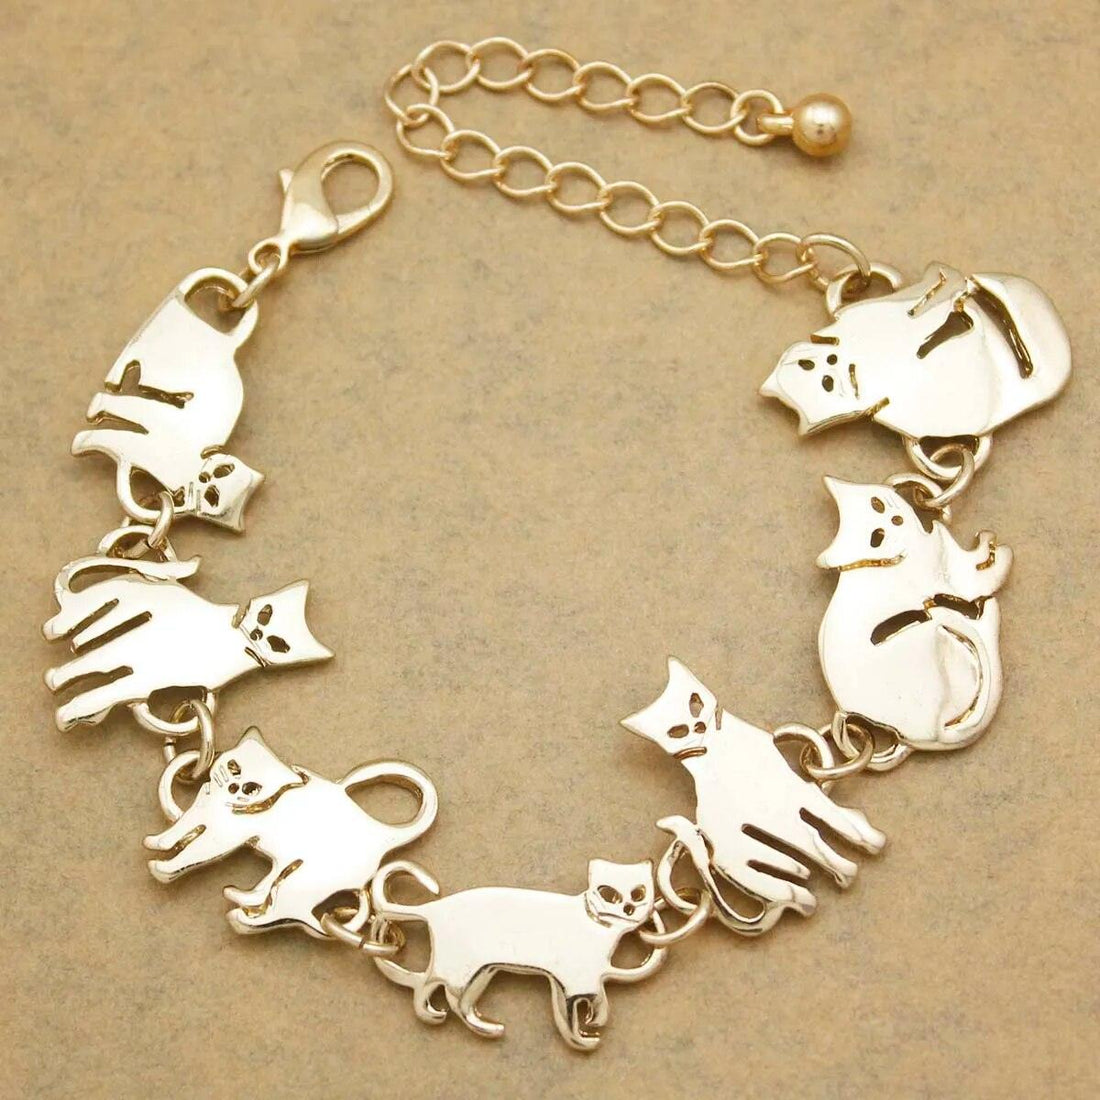 Multiple Cats Charm Bracelet, Black/Silver/Gold - Just Cats - Gifts for Cat Lovers